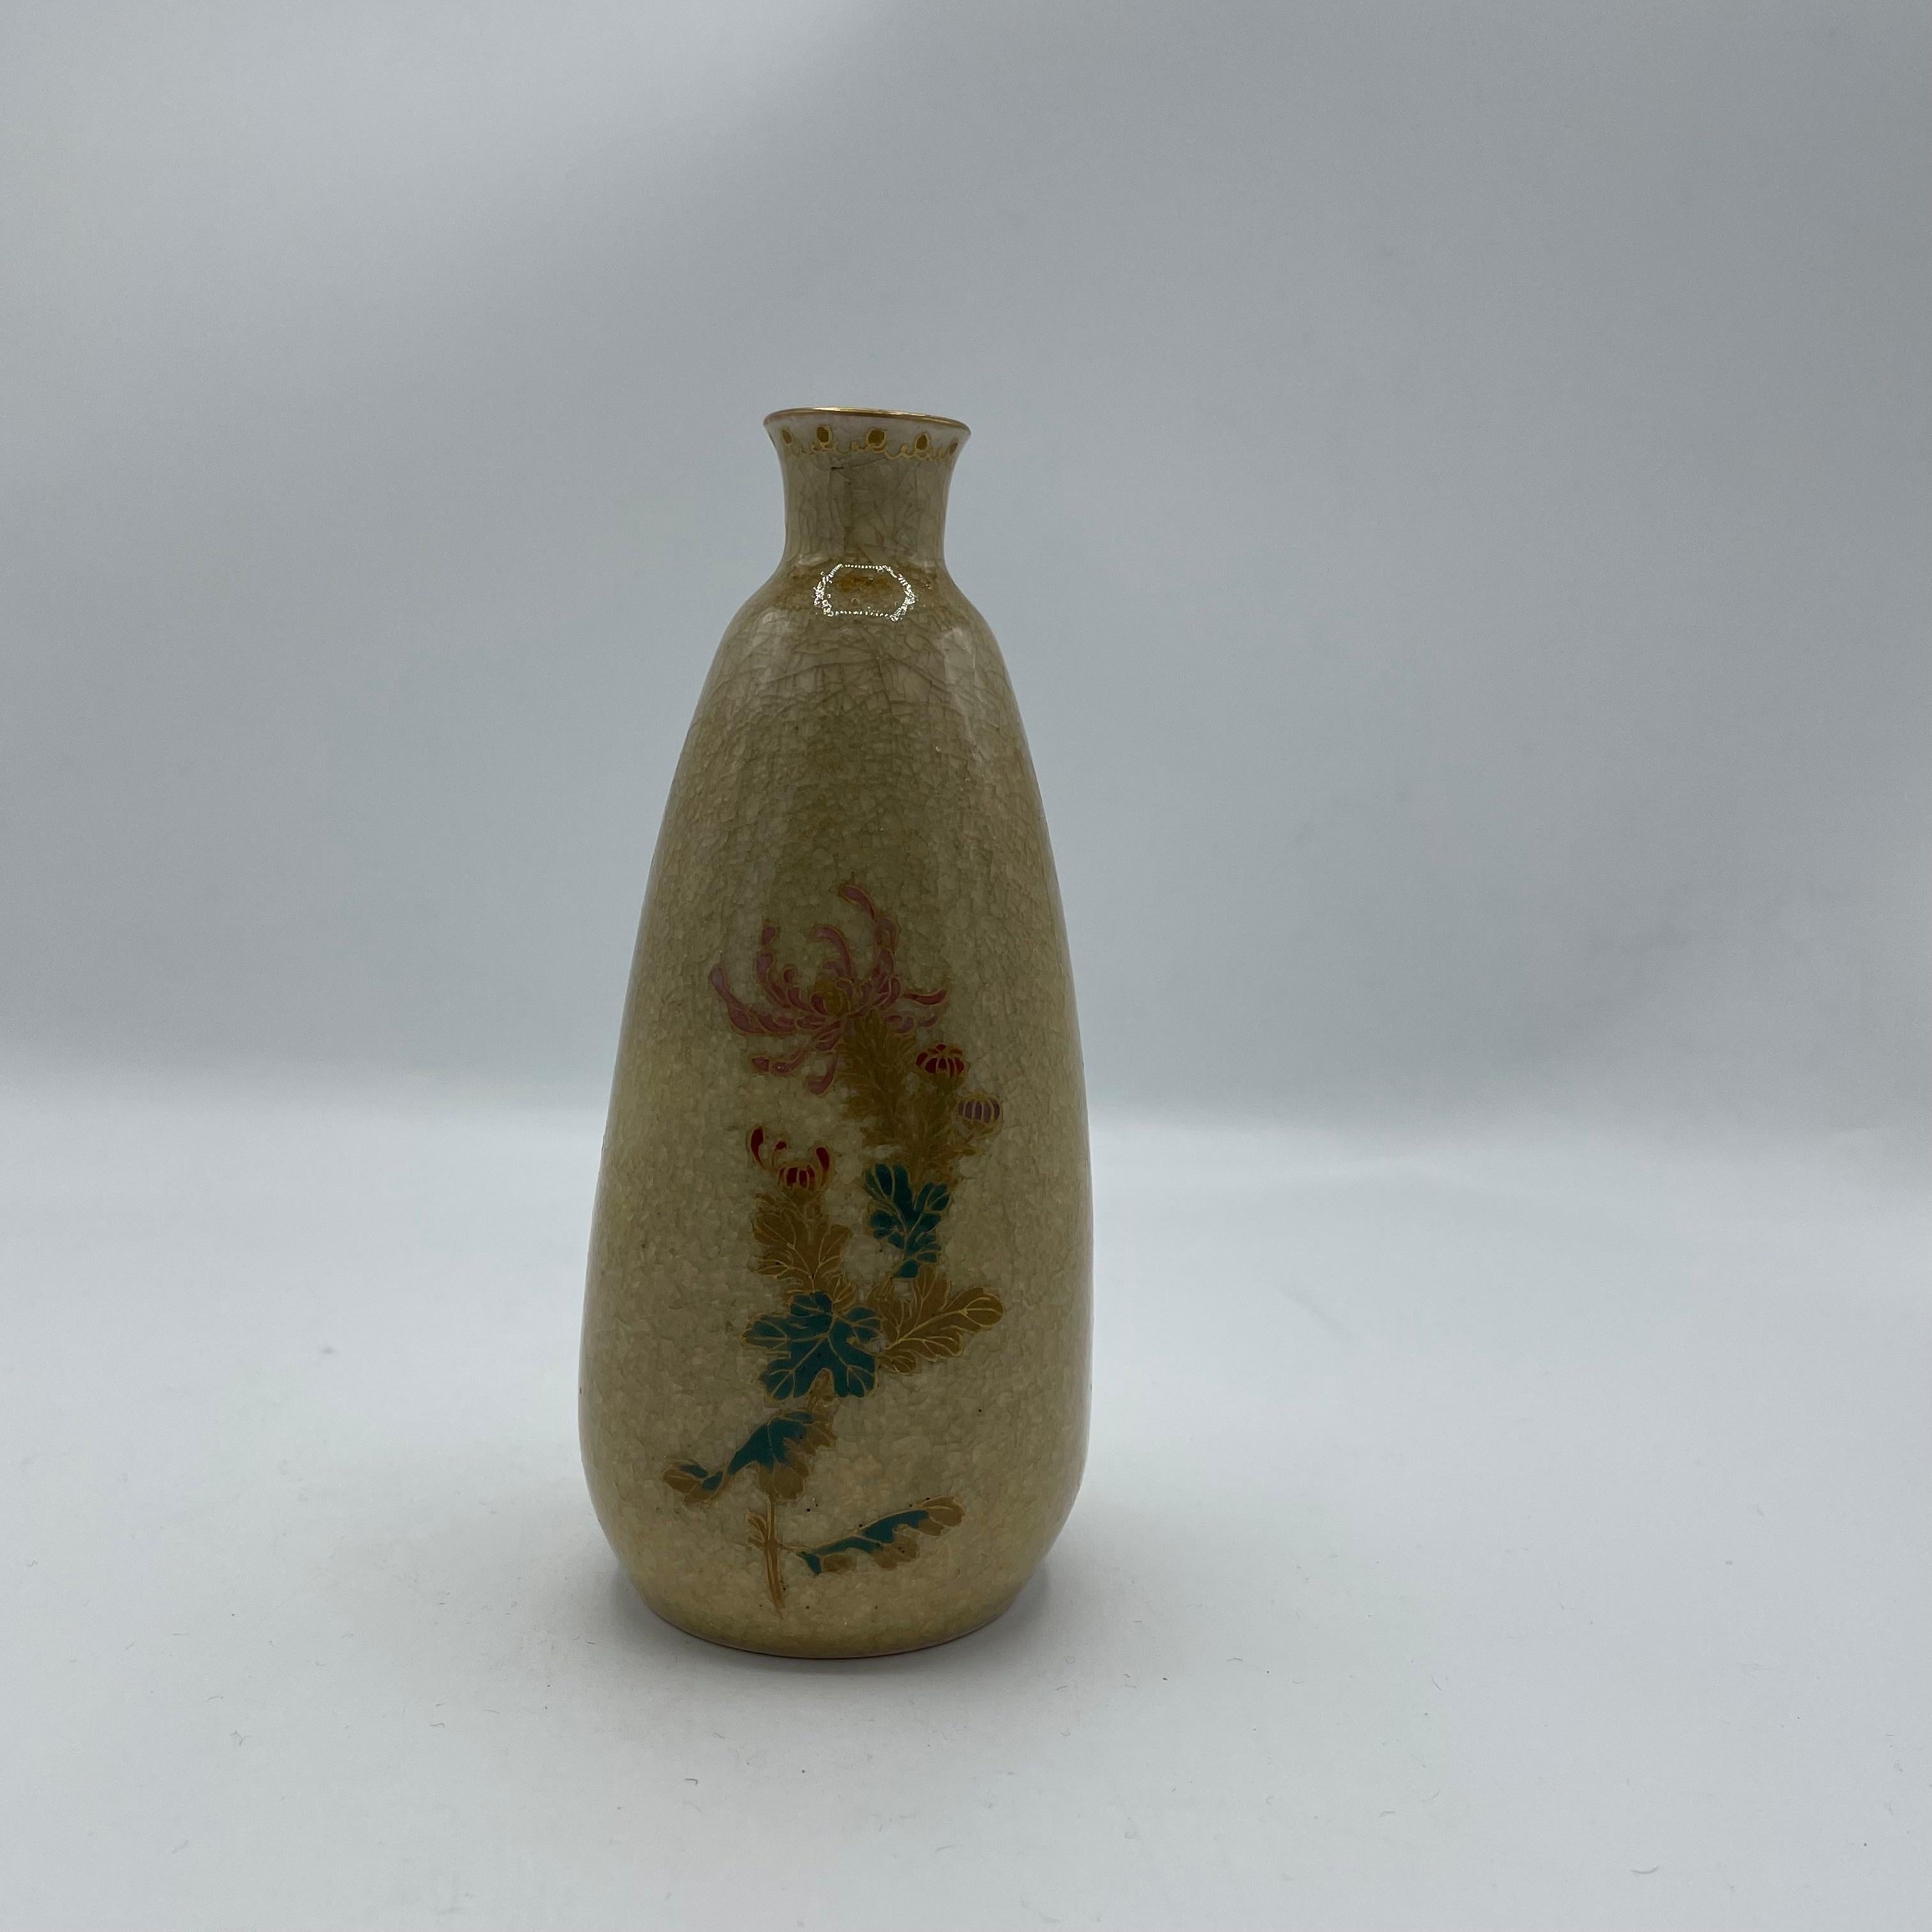 This is a sake bottle which we call 'Tokkuri' in Japanese.
This is used to use by serving sake. It is made with porcelain and it was made around 1960s in Showa era.
There are a motif of Chrysanthemum on the surface.
This bottle can be use as sake